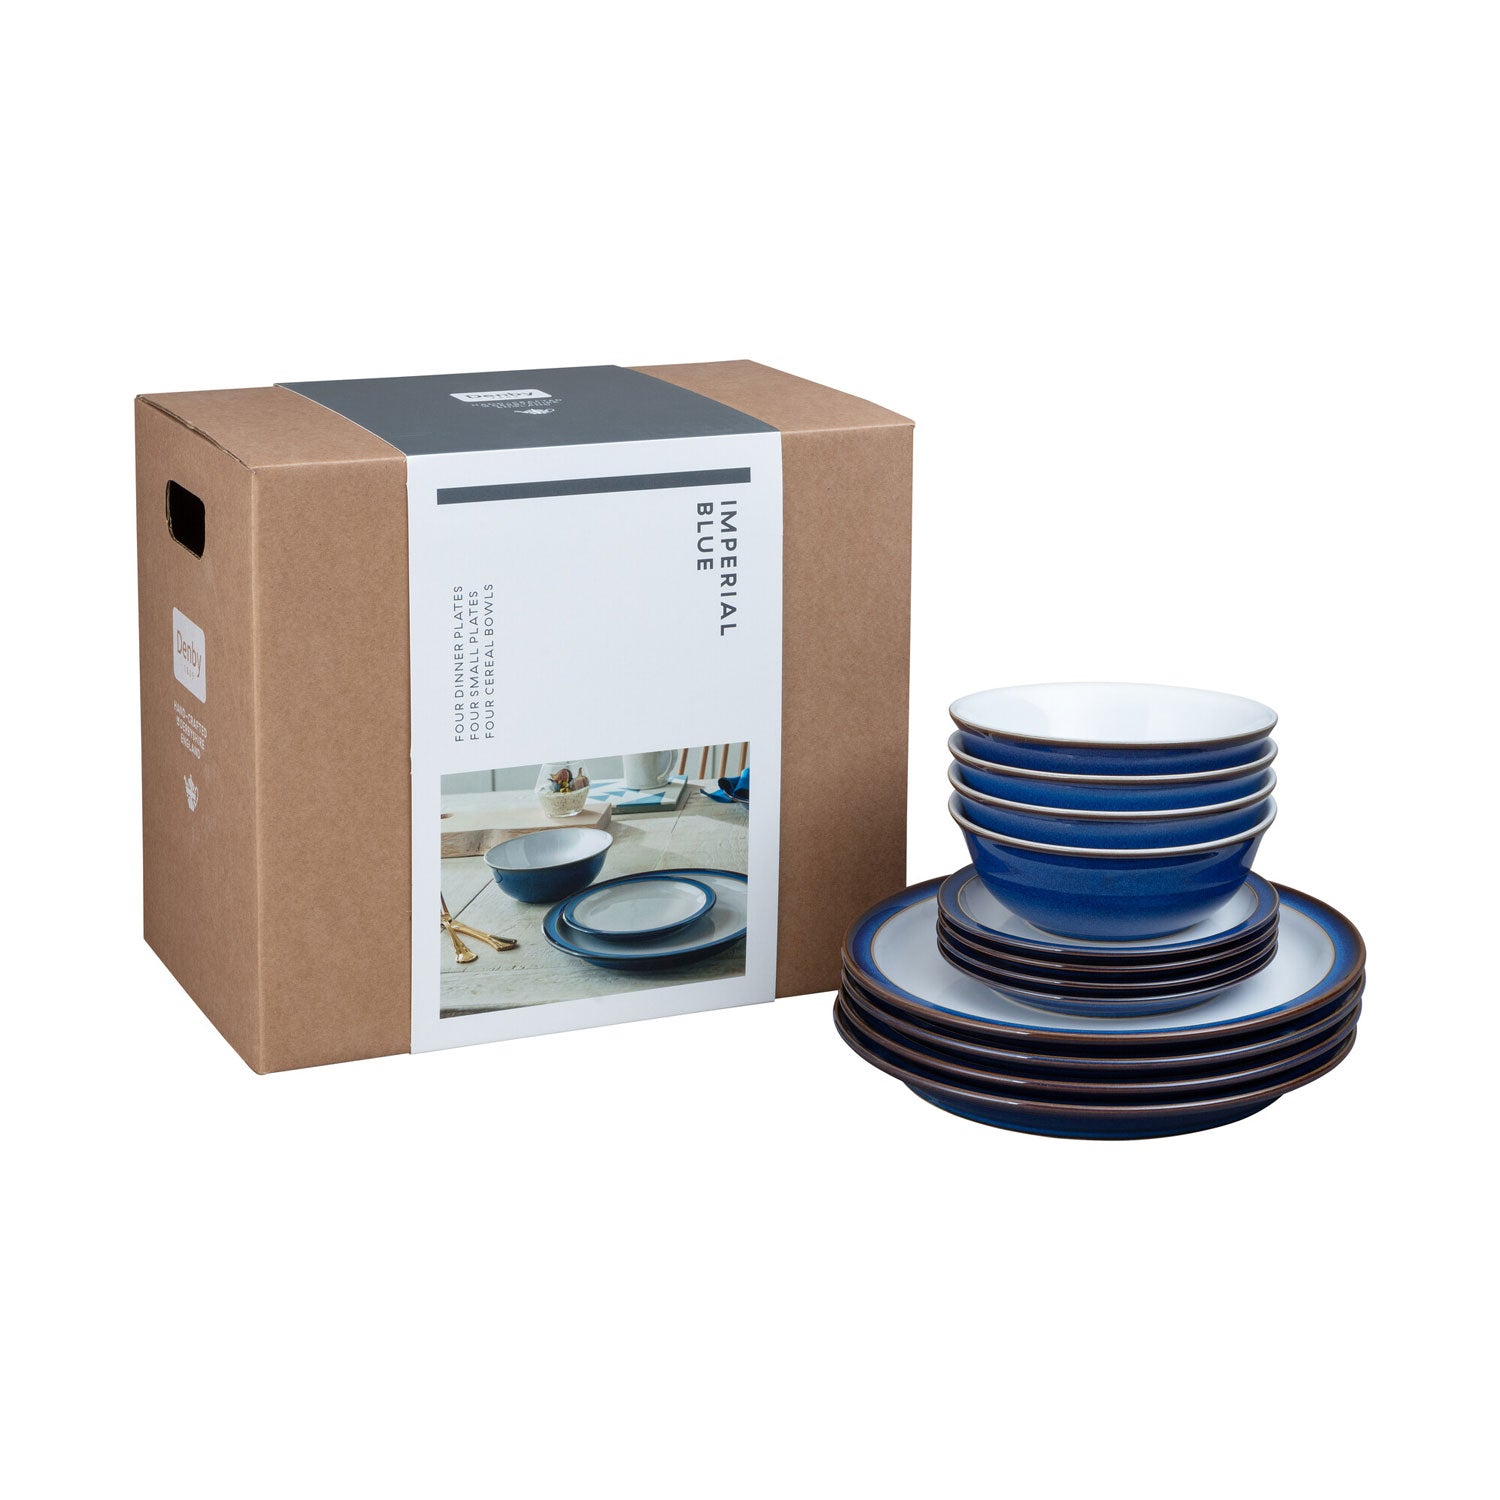 Denby 12 Piece Tableware Set - Imperial Blue 1 Shaws Department Stores